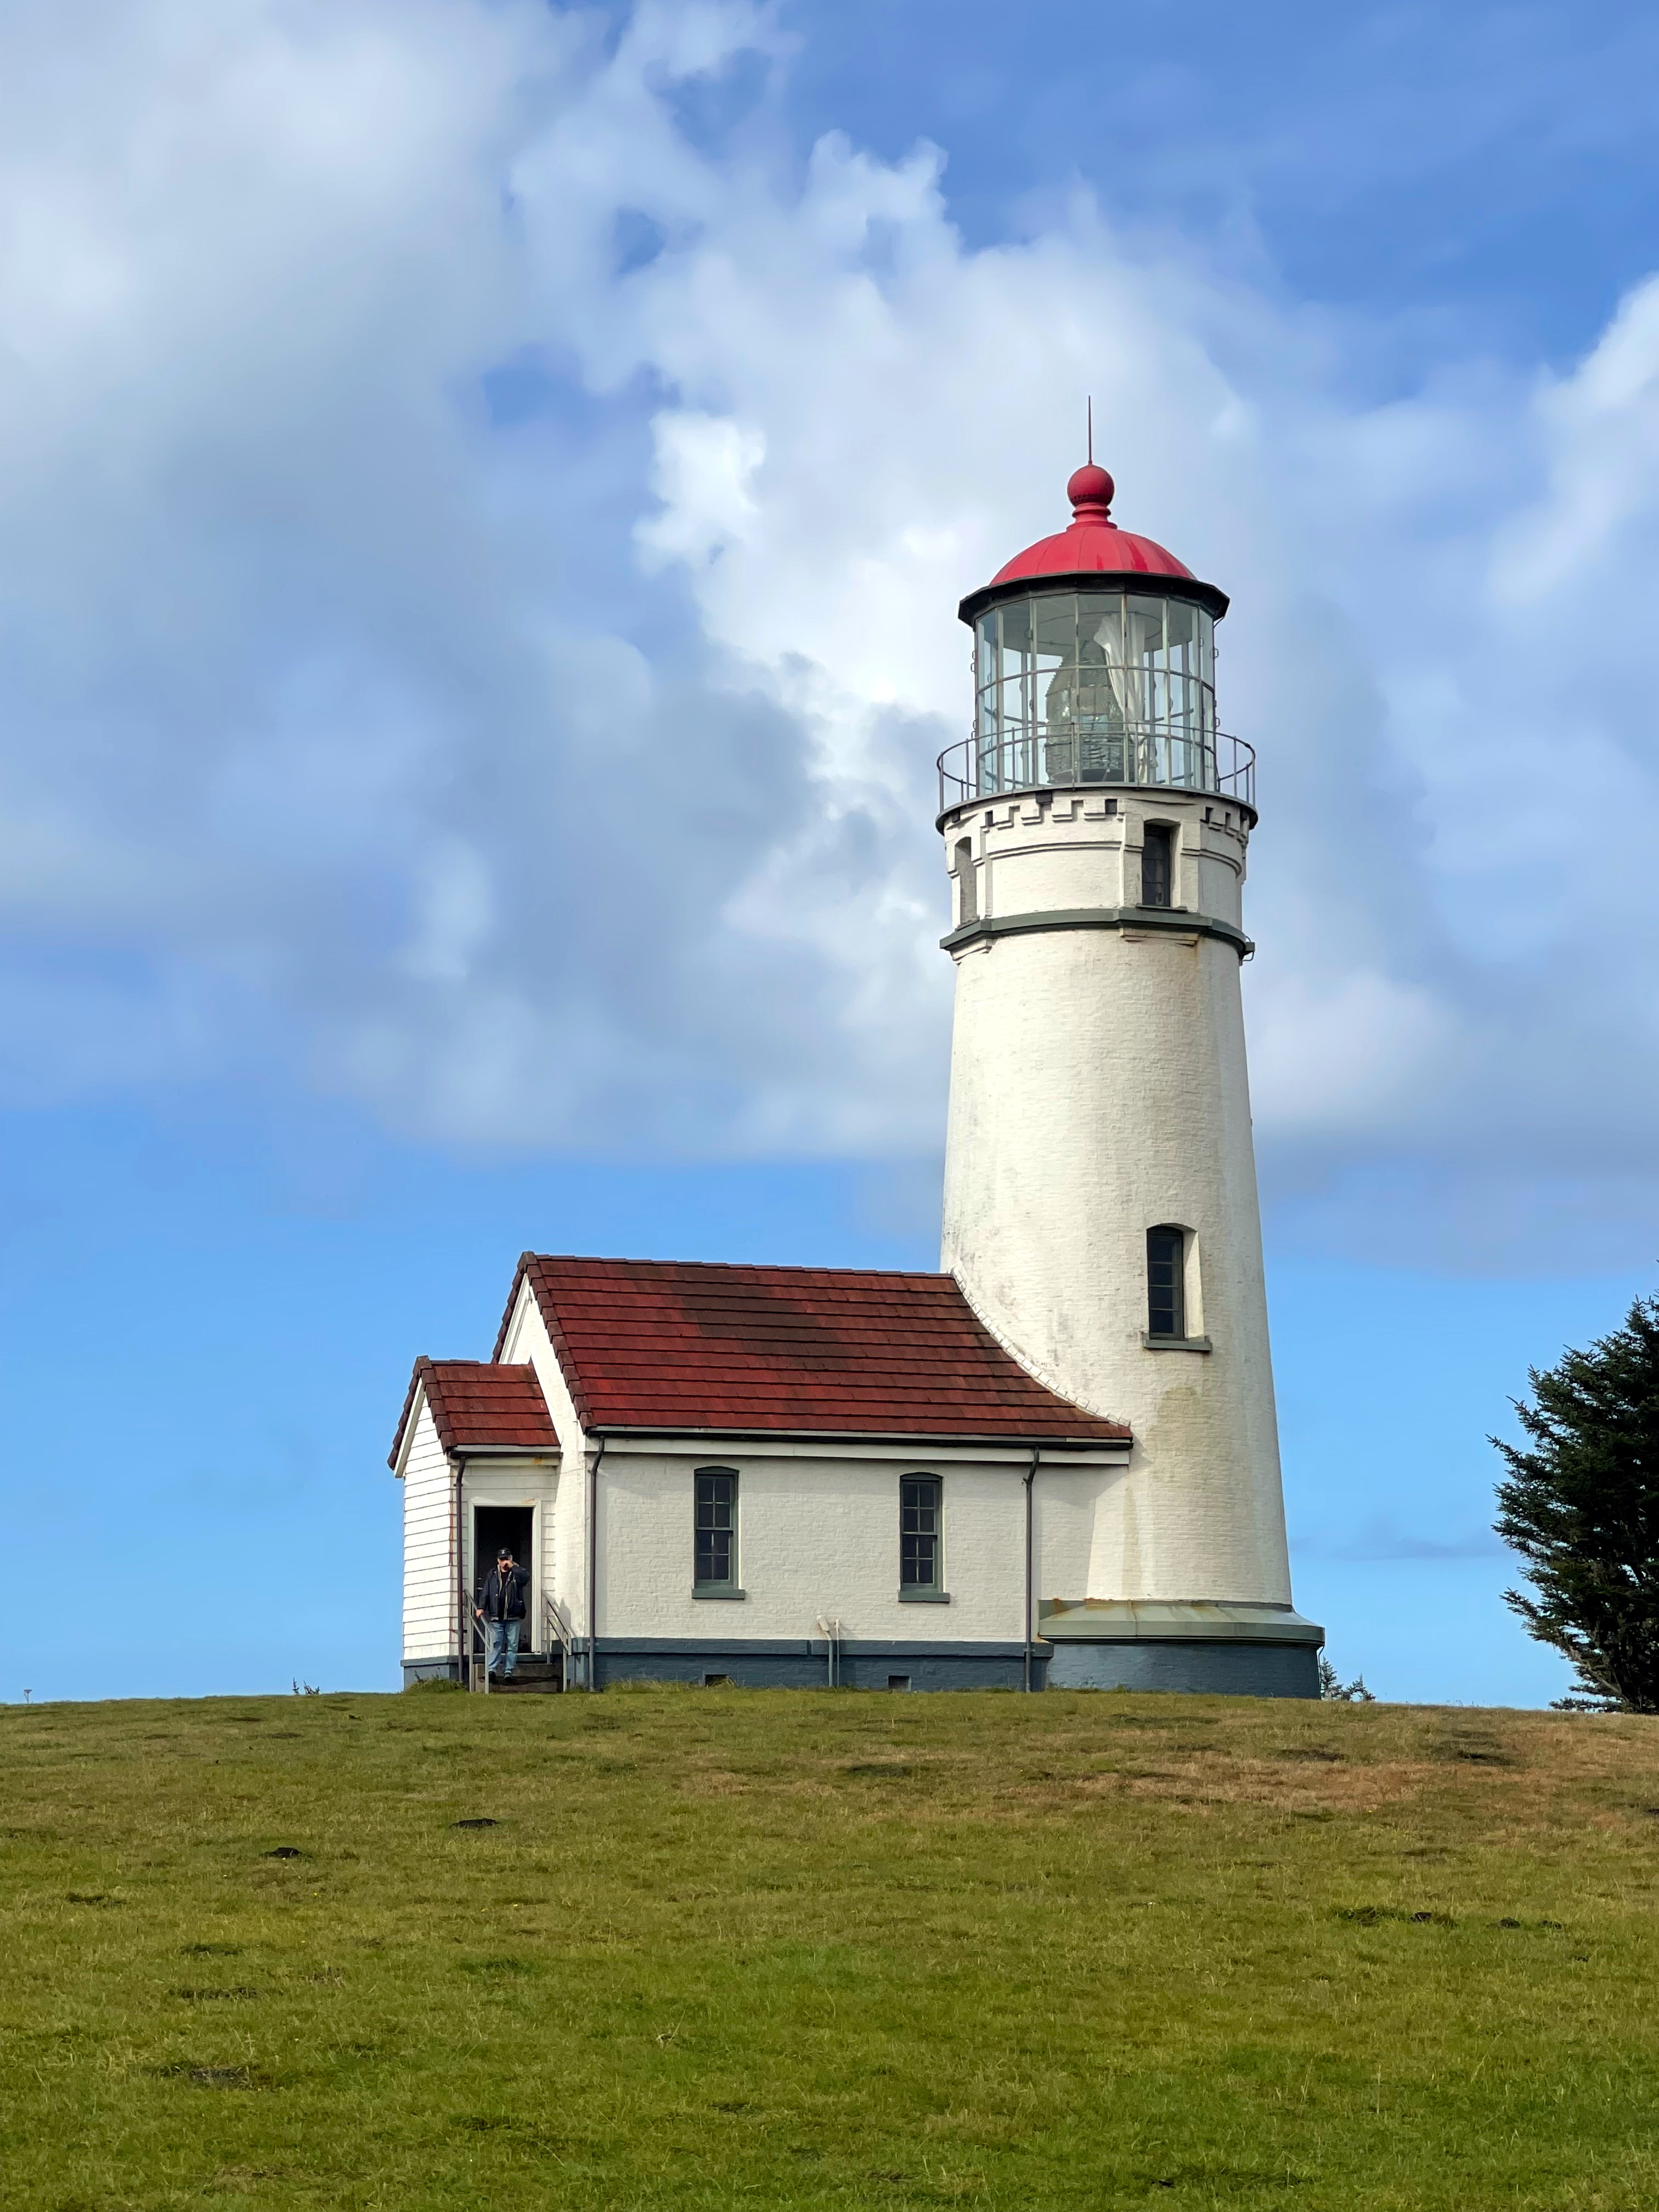 The Cape Blanco Lighthouse. Photograph by Brian Zimmerman.